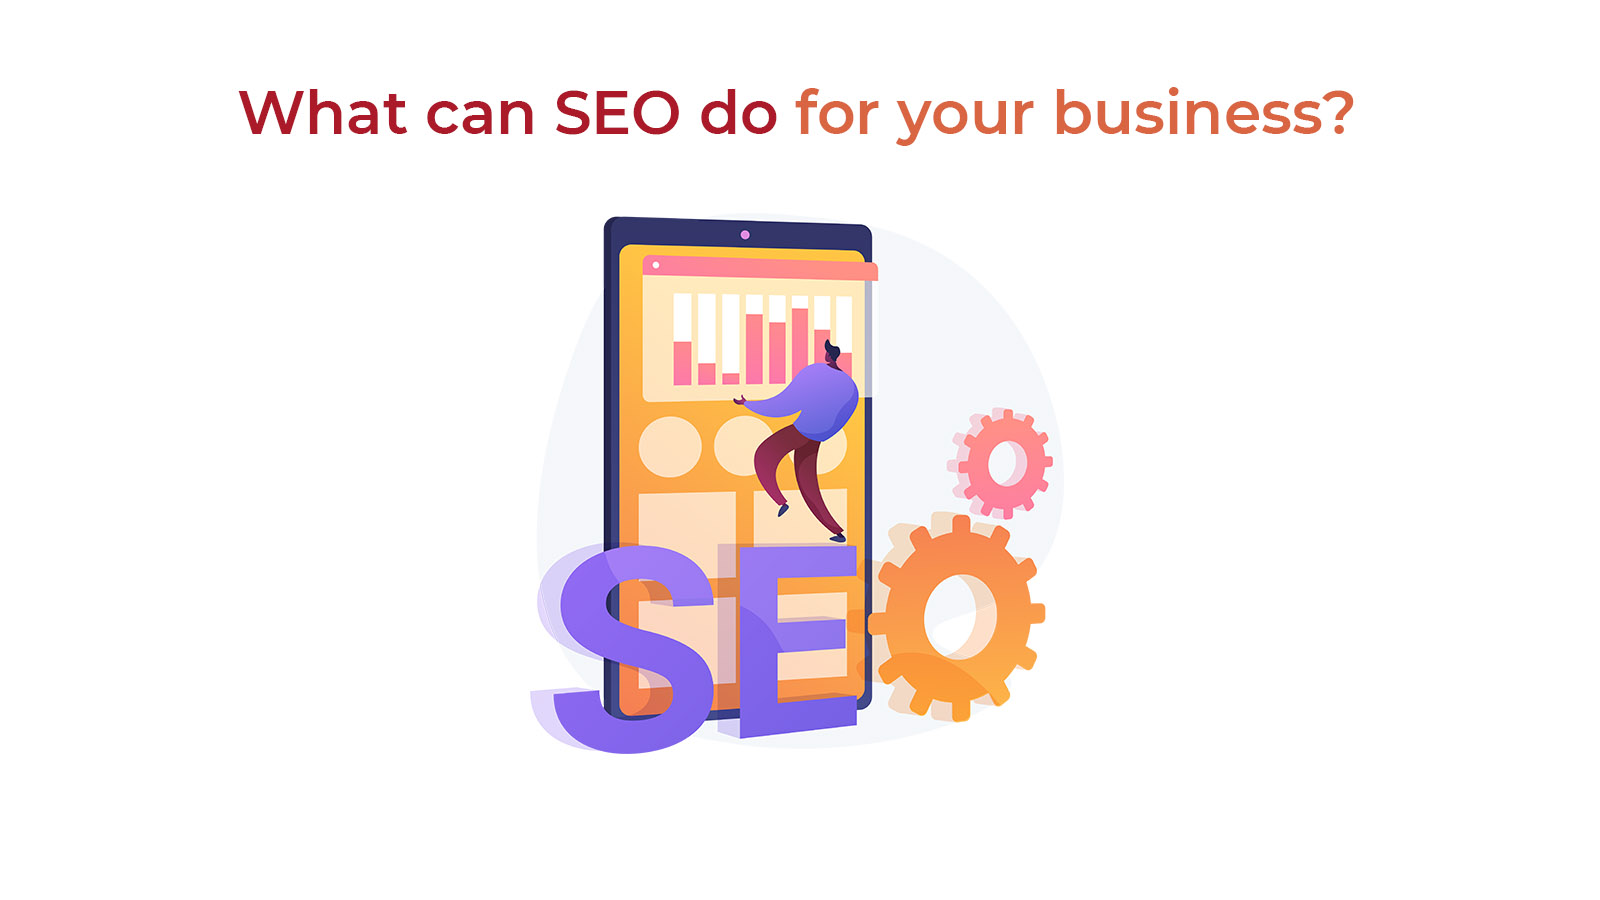 What can SEO do for your business?